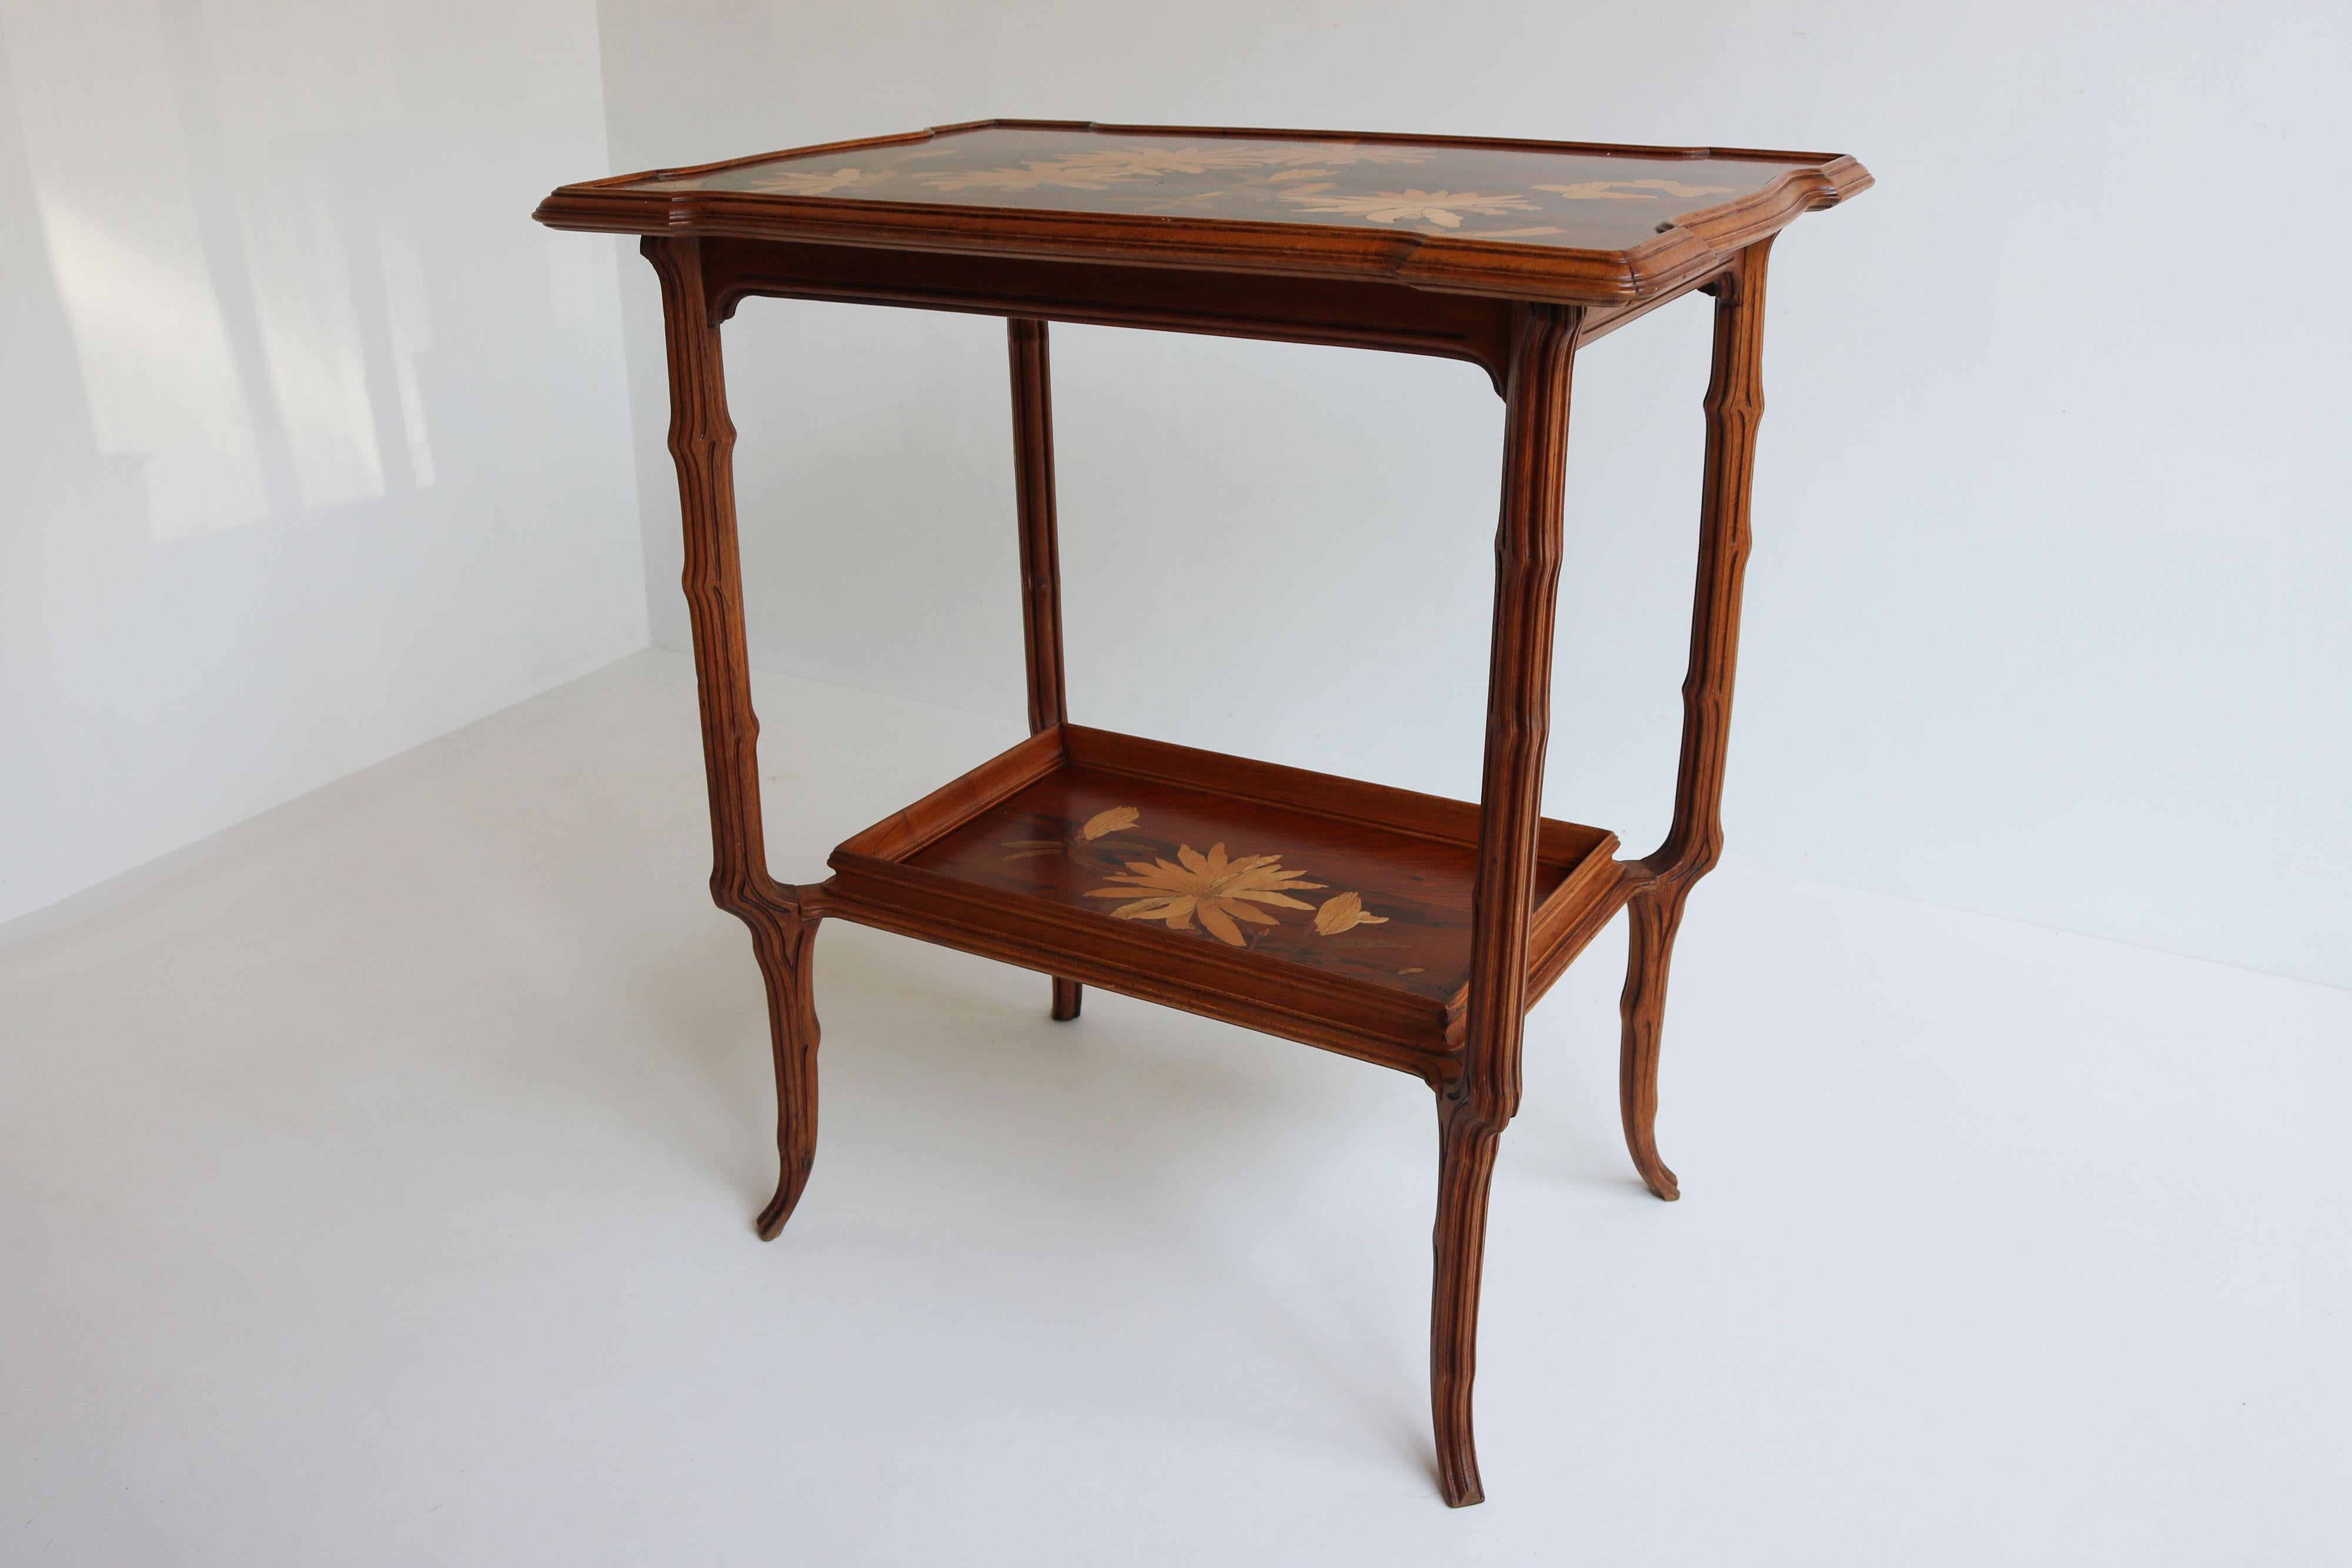 Original French Art Nouveau Marquetry Table ''Japonisme'' by Emile Galle 1900 For Sale 4